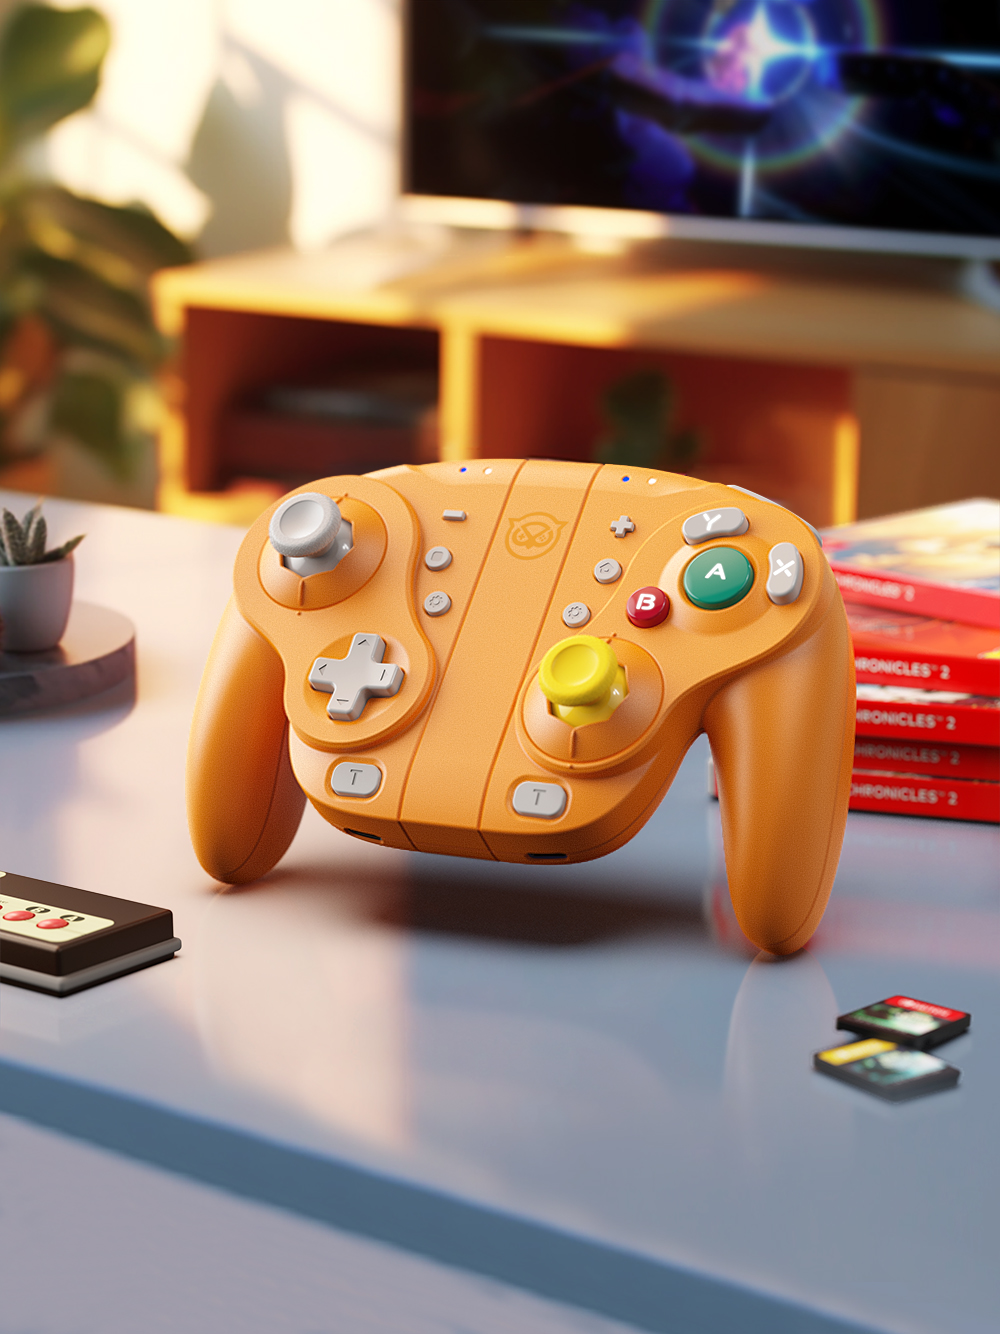 The NYXI Wizard is a retro Switch controller without stick drift